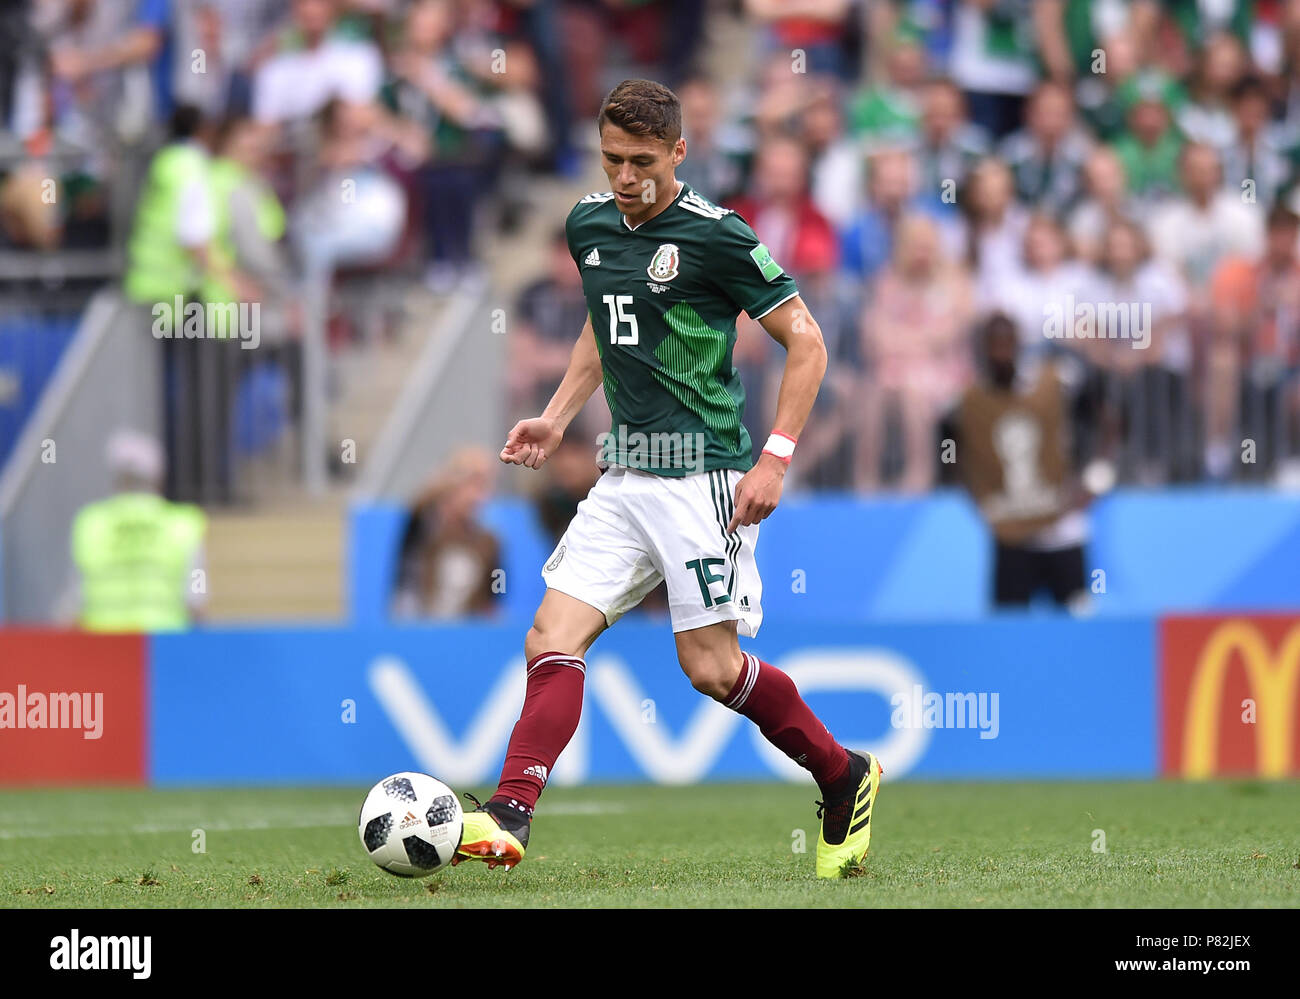 MOSCOW, RUSSIA - JUNE 17: Hector Moreno of Mexico in action during the 2018 FIFA World Cup Russia group F match between Germany and Mexico at Luzhniki Stadium on June 17, 2018 in Moscow, Russia. (Photo by Lukasz Laskowski/PressFocus/MB Media) Stock Photo